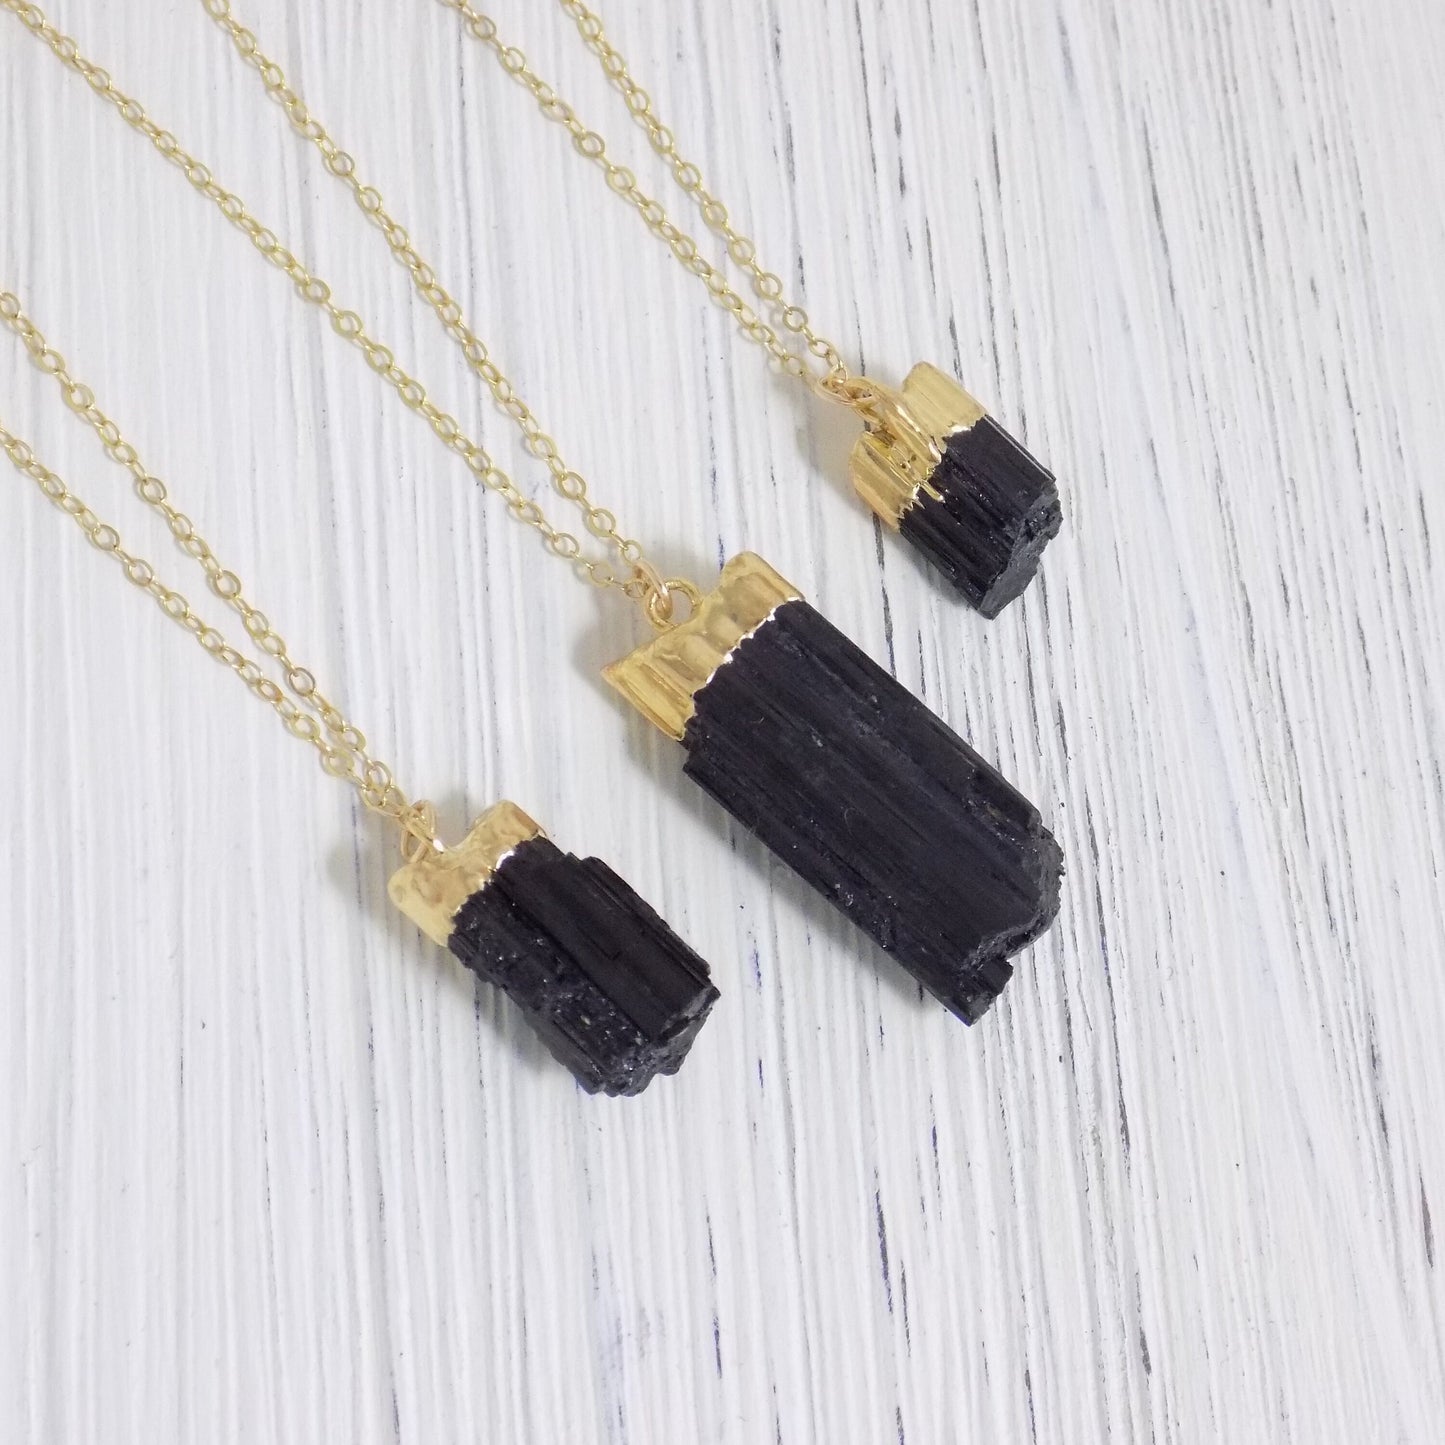 Raw Black Tourmaline Pendant Necklace Gold - Christmas Gifts For Her